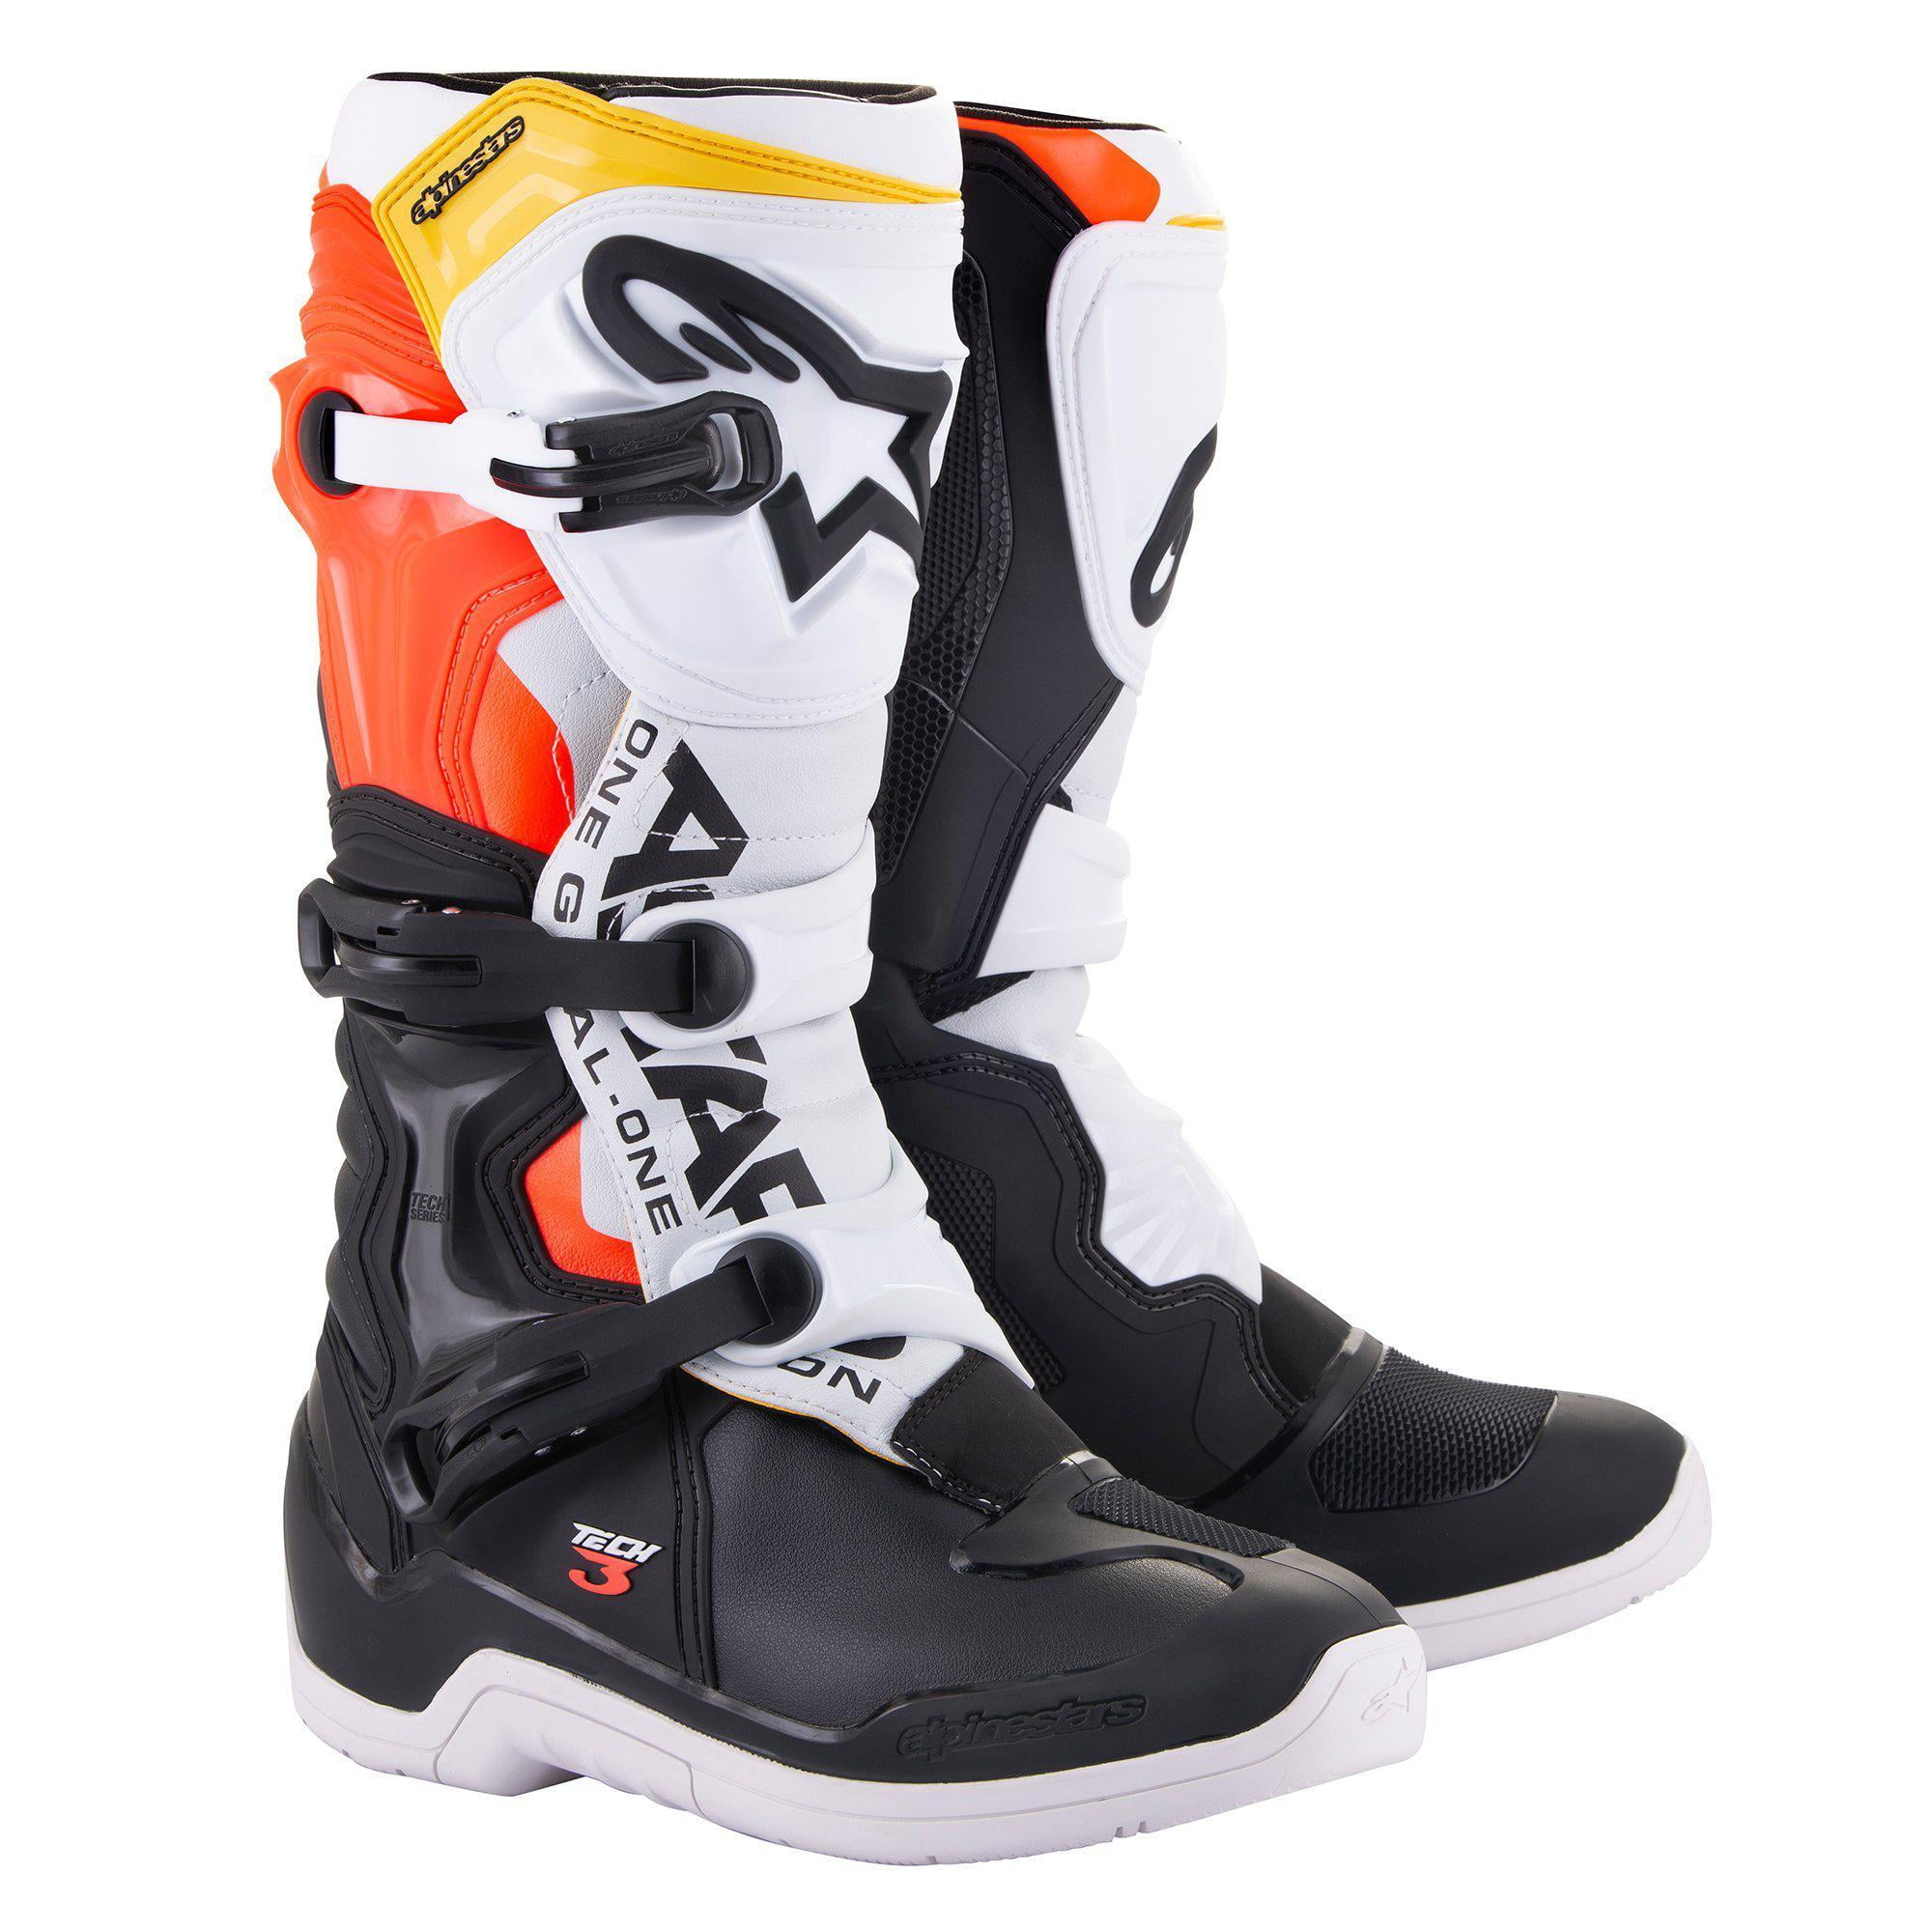 NEW Alpinestars Official Honda Faster 3 Motorcycle Sports Pit Lace Shoes/Boots 